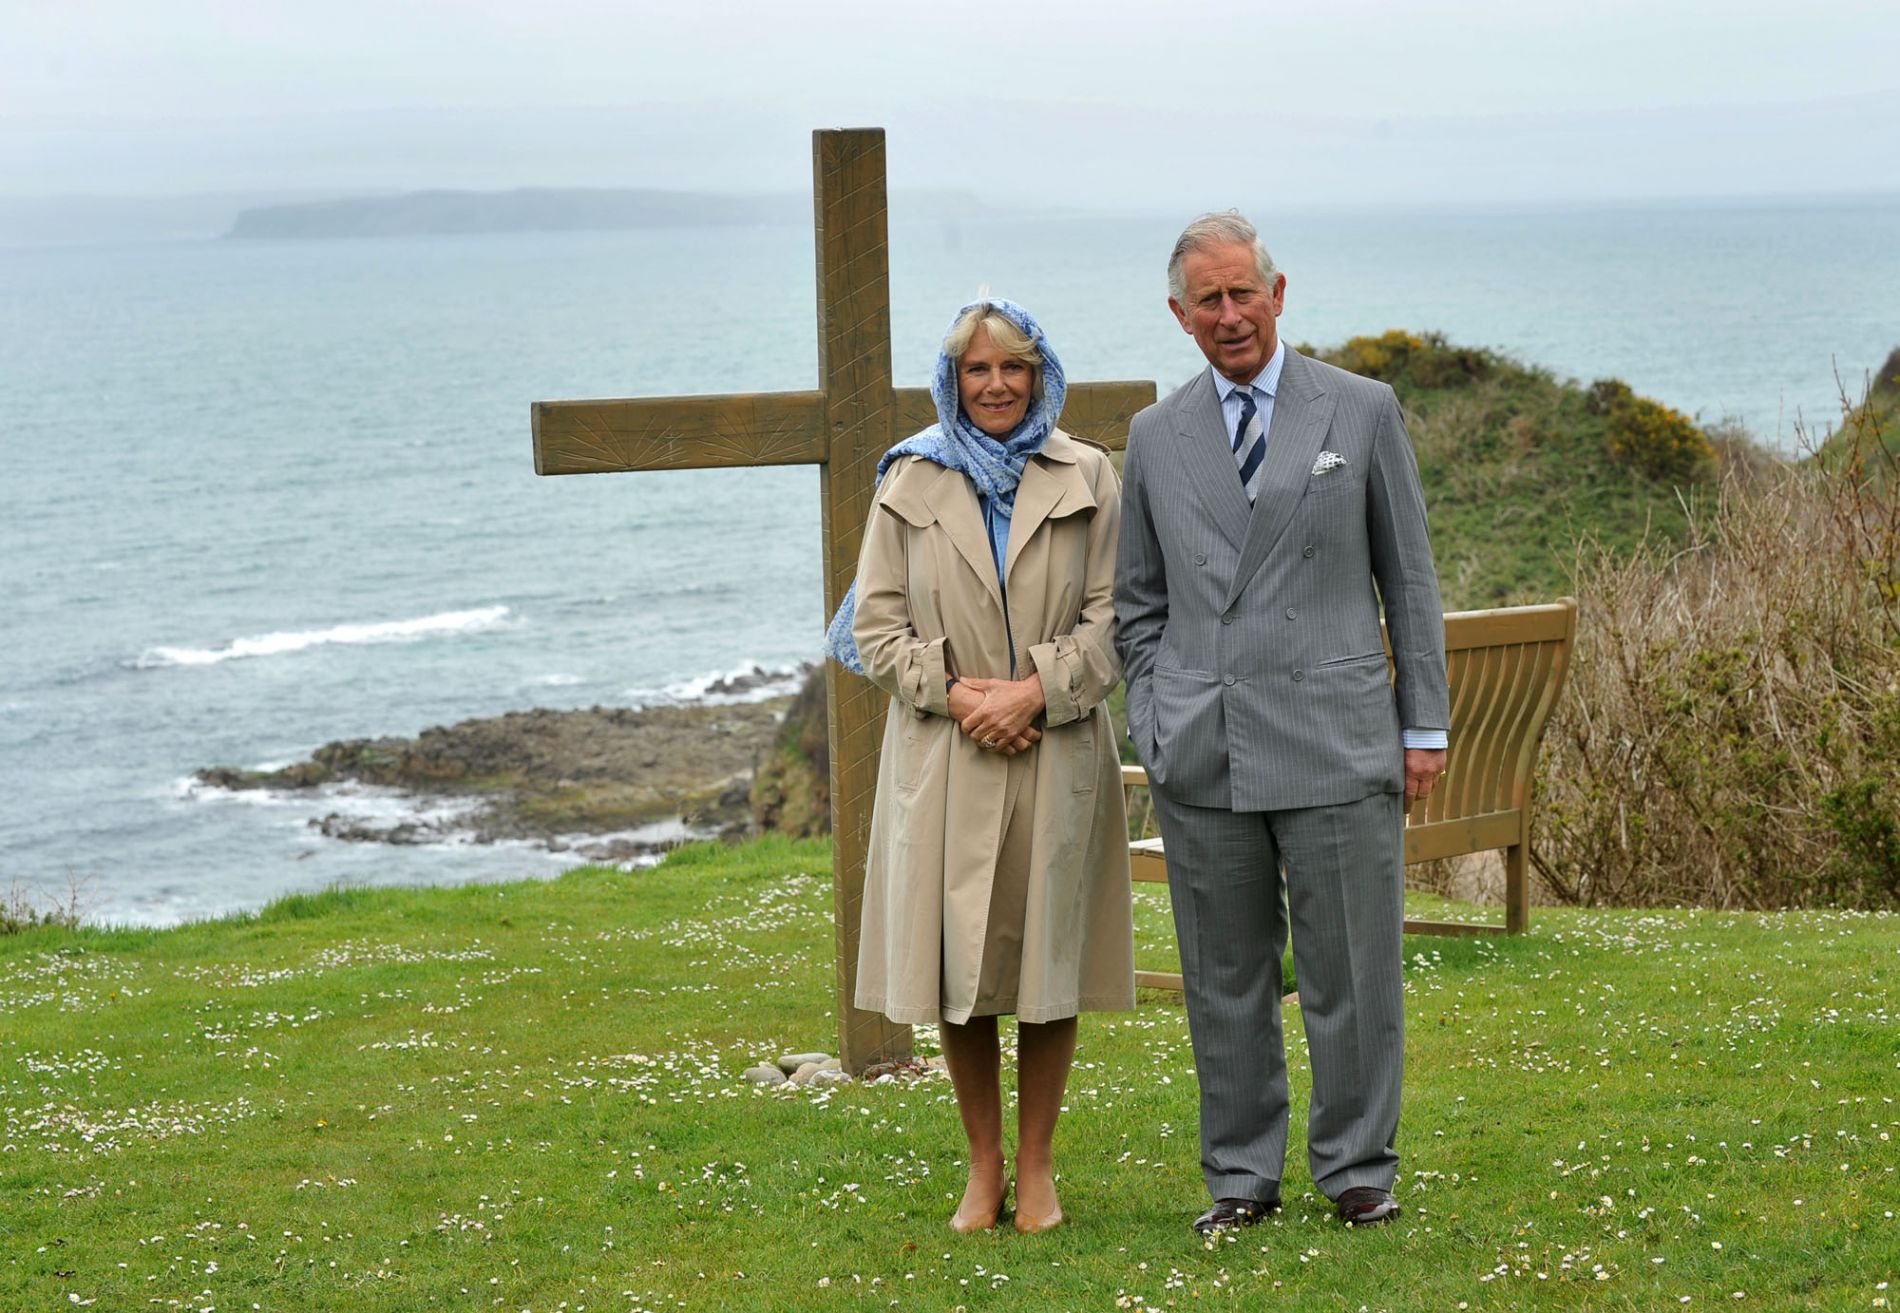 Prince Charles and Camilla May 2015 by Aaron McCracken : Harrisons Northern Ireland Office via Wikimedia Commons